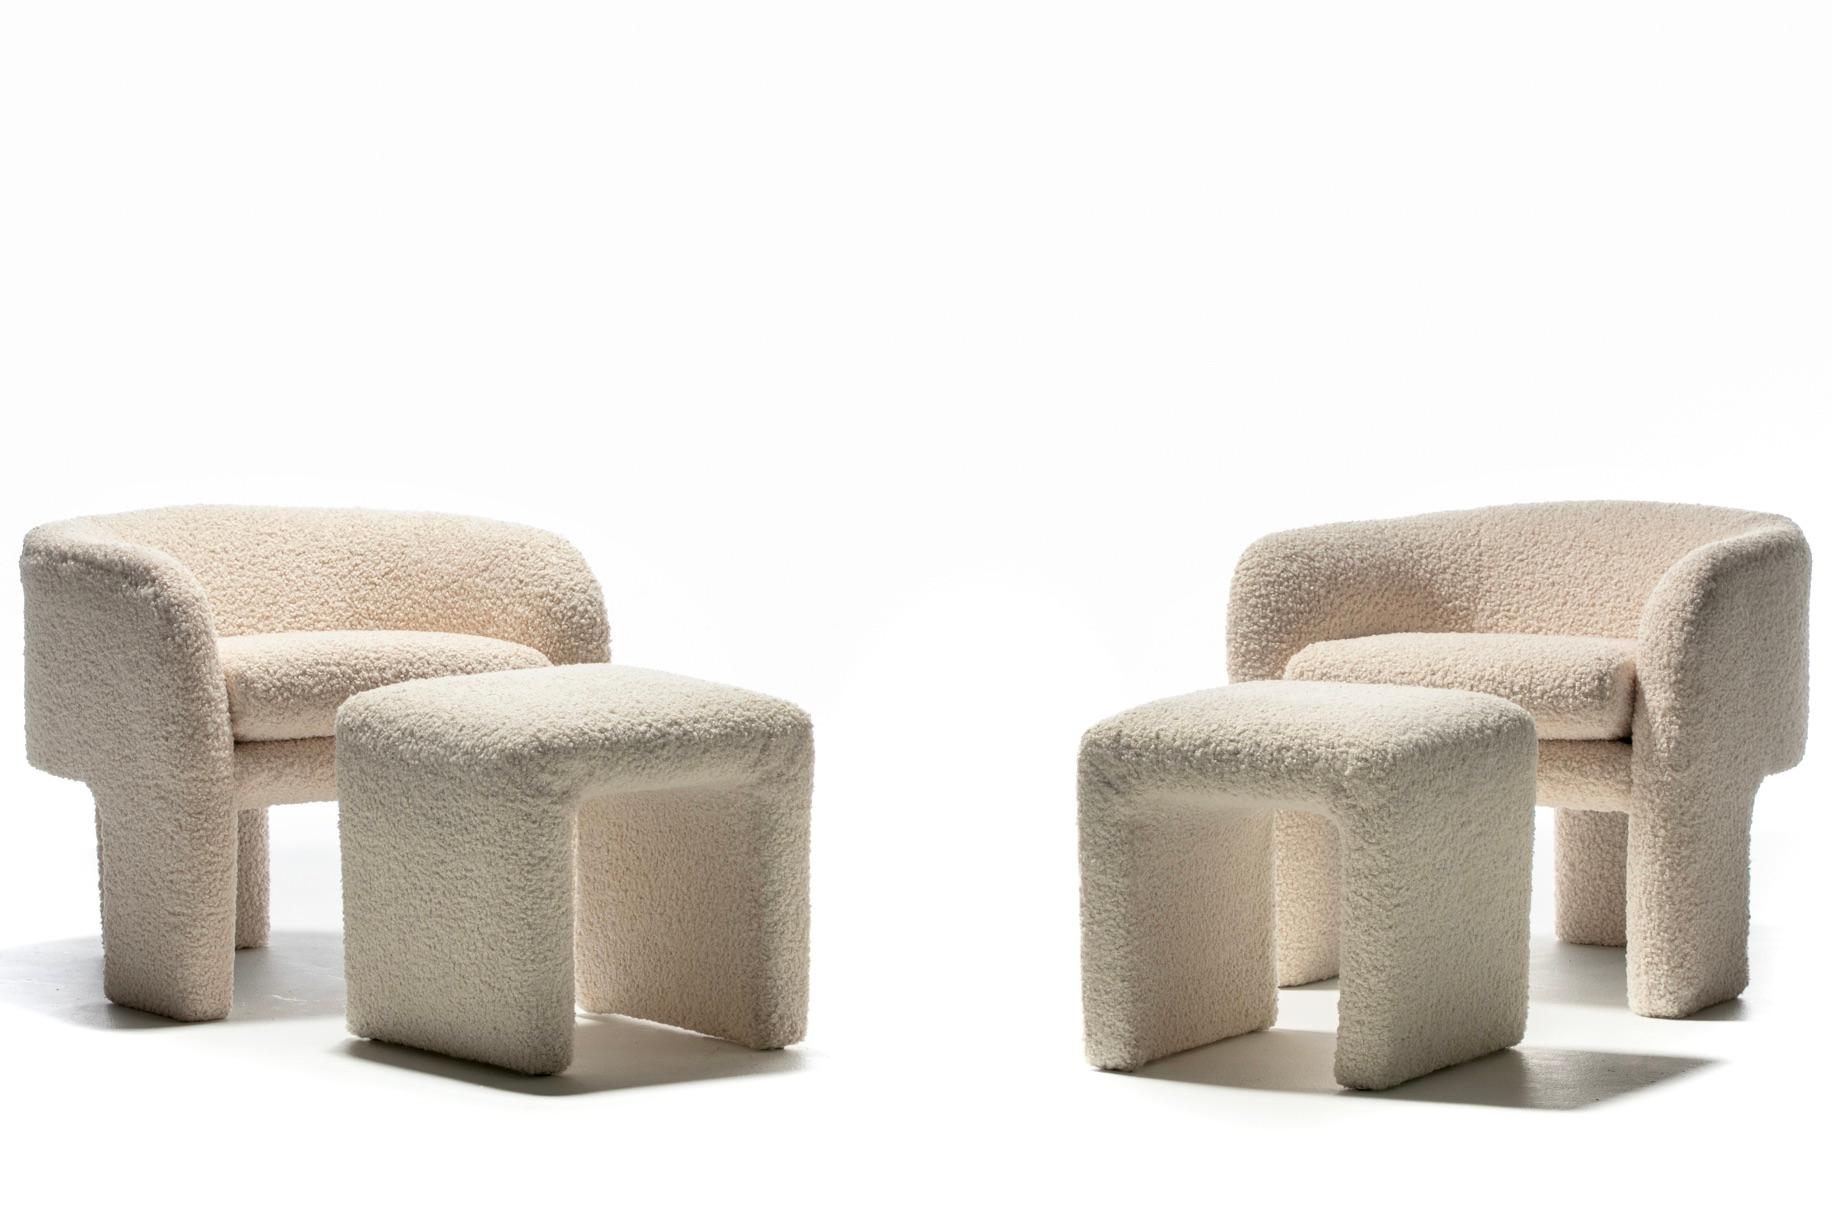 Late 20th Century Pair of Preview Tri Leg Post Modern Armchairs Newly Upholstered in Ivory Bouclé  For Sale